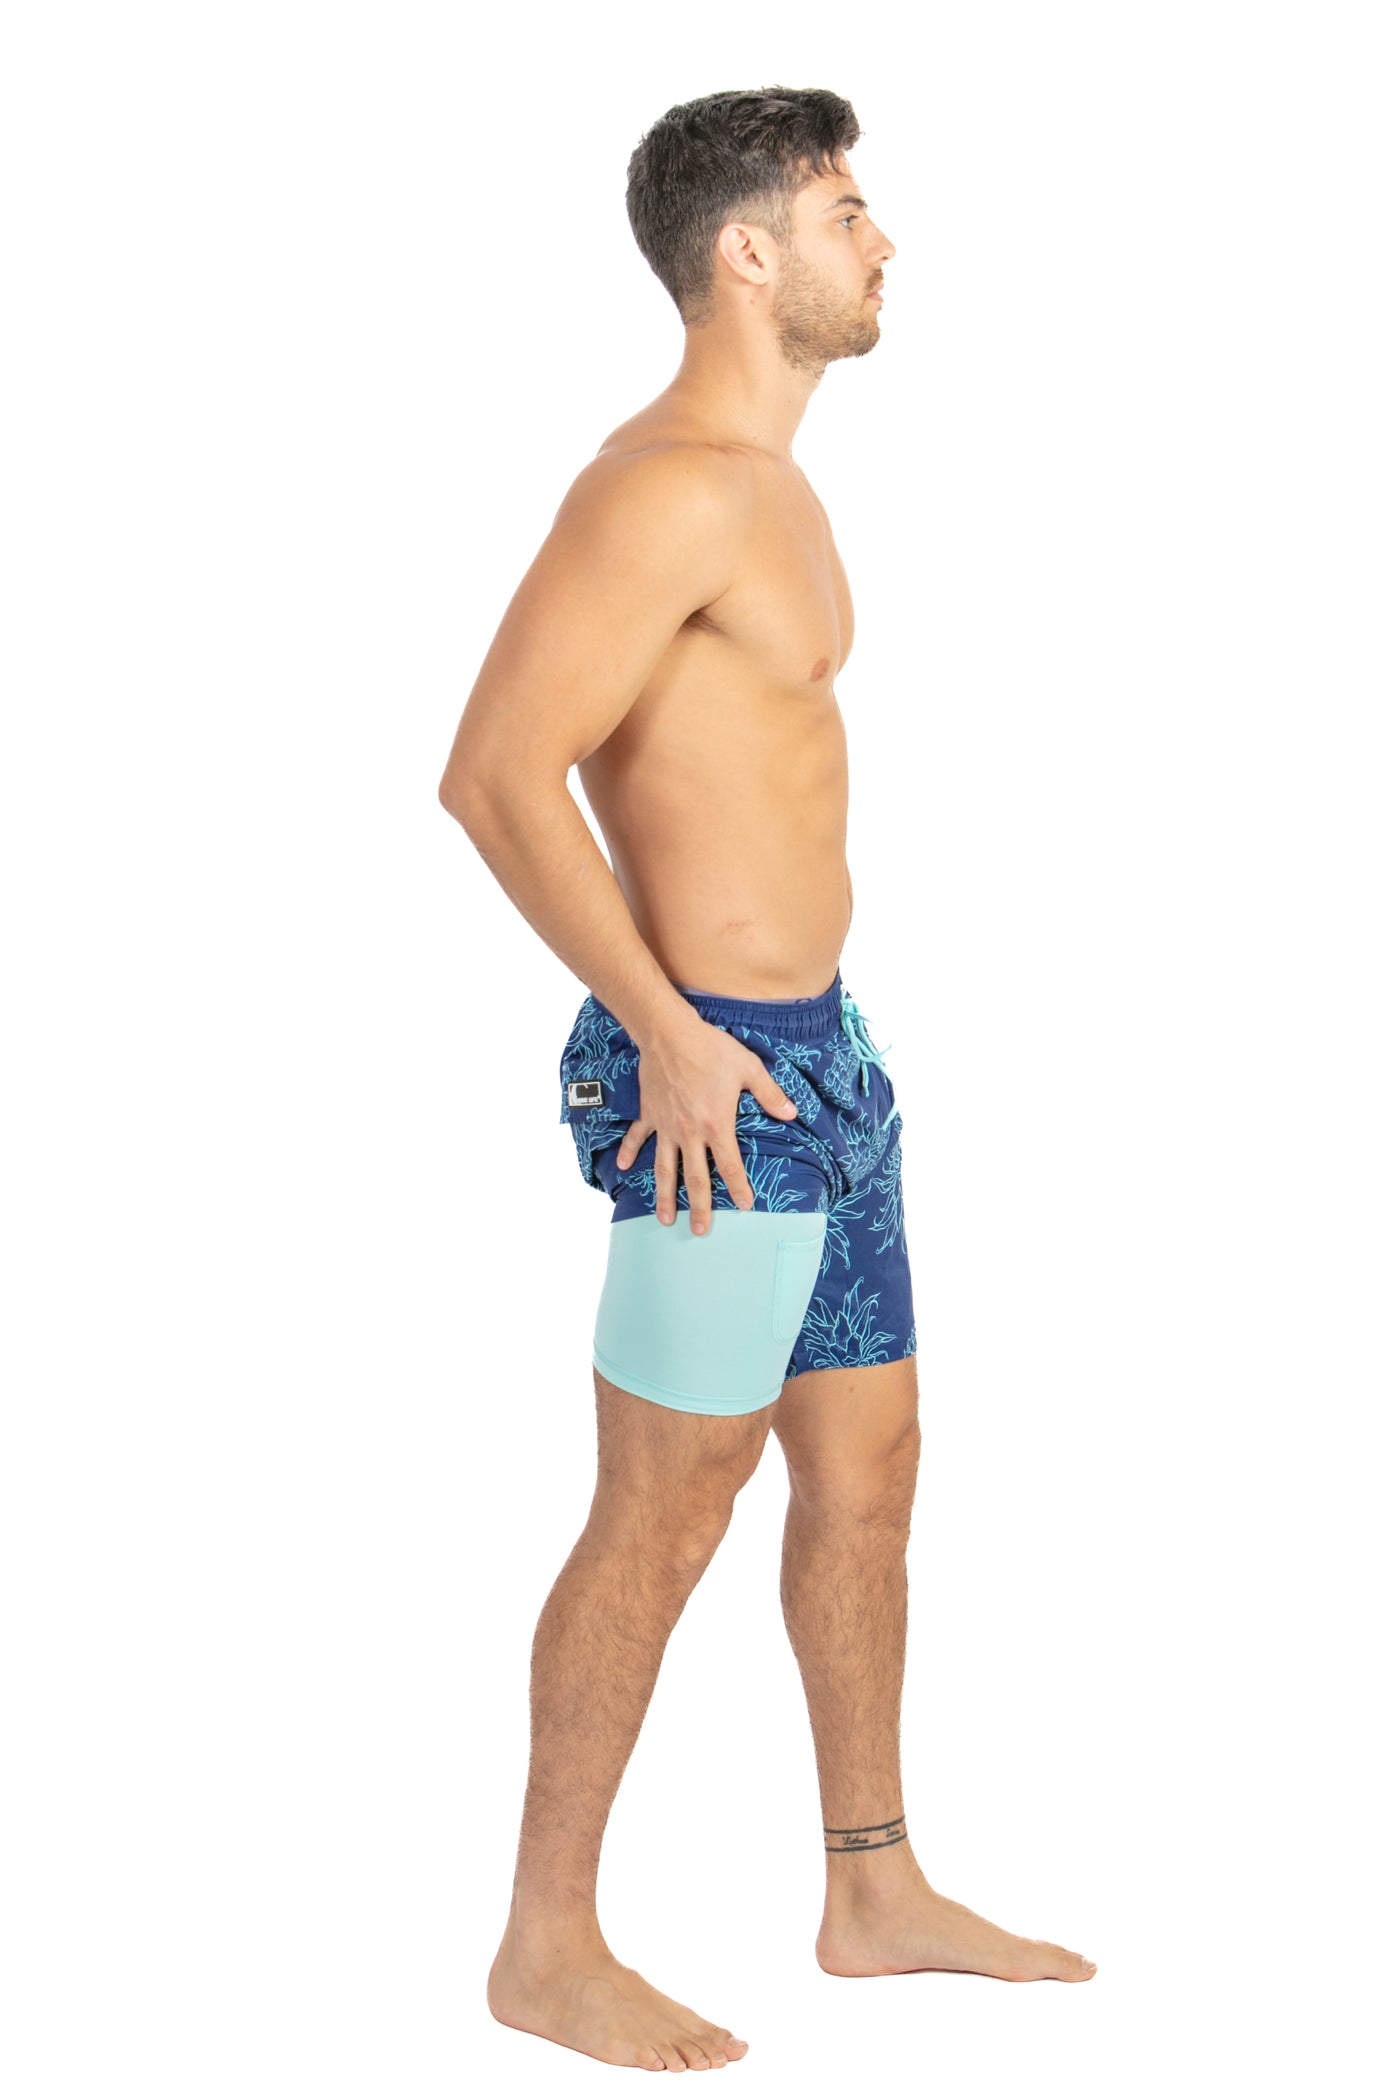 Pineapple Dream - 17" Compression Shorts - Wavelife